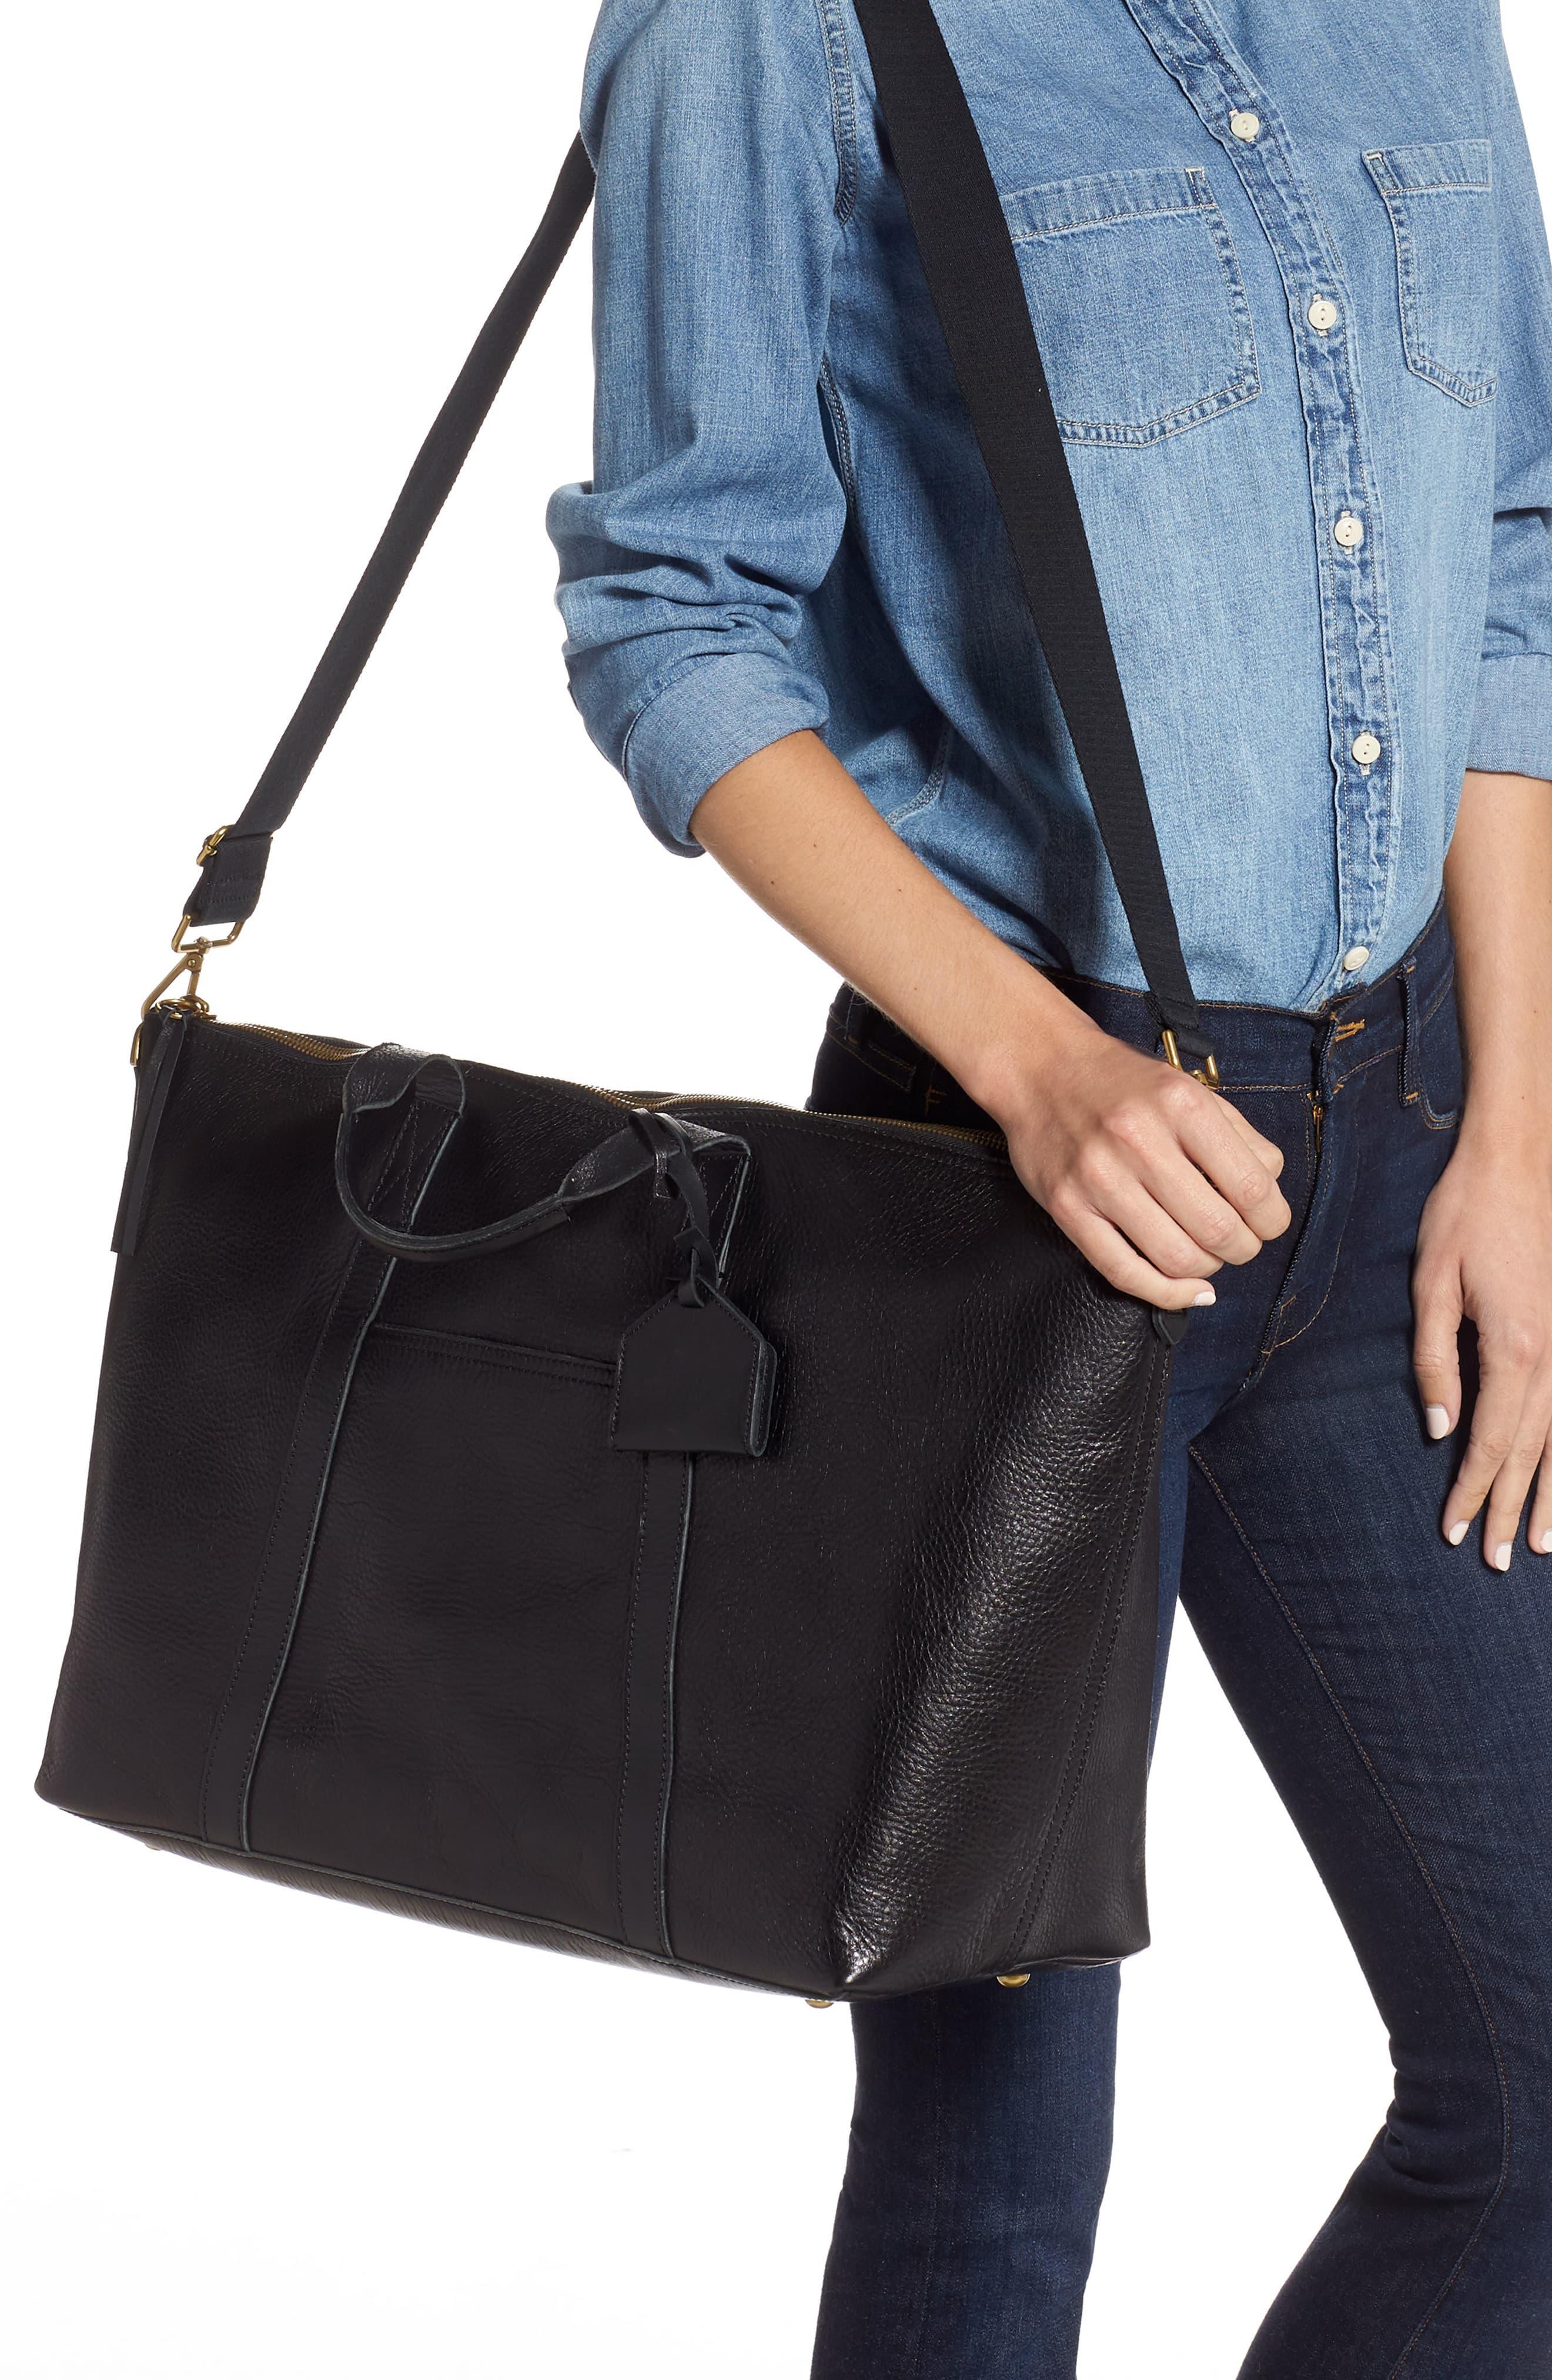 Madewell The Essential Overnight Bag In Leather in Black - Lyst